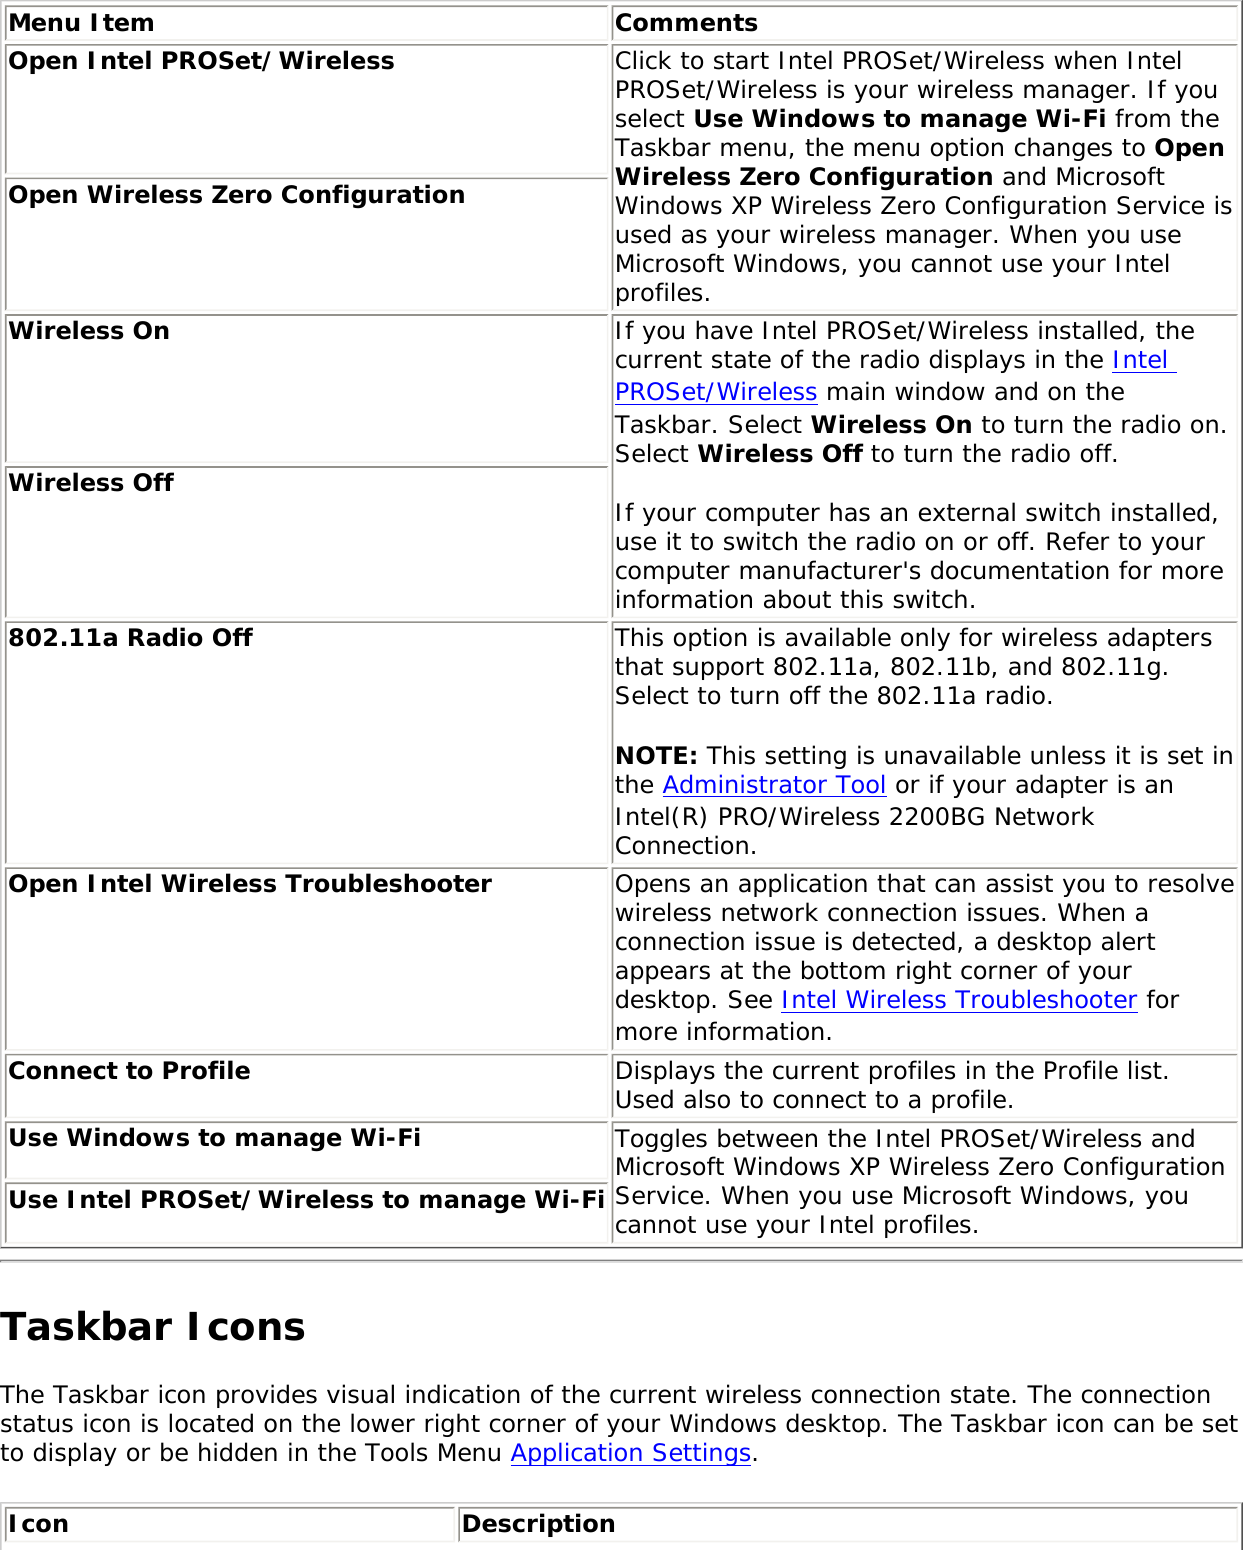 Menu Item CommentsOpen Intel PROSet/Wireless Click to start Intel PROSet/Wireless when Intel PROSet/Wireless is your wireless manager. If you select Use Windows to manage Wi-Fi from the Taskbar menu, the menu option changes to Open Wireless Zero Configuration and Microsoft Windows XP Wireless Zero Configuration Service is used as your wireless manager. When you use Microsoft Windows, you cannot use your Intel profiles. Open Wireless Zero Configuration Wireless On If you have Intel PROSet/Wireless installed, the current state of the radio displays in the Intel PROSet/Wireless main window and on the Taskbar. Select Wireless On to turn the radio on. Select Wireless Off to turn the radio off. If your computer has an external switch installed, use it to switch the radio on or off. Refer to your computer manufacturer&apos;s documentation for more information about this switch. Wireless Off 802.11a Radio Off  This option is available only for wireless adapters that support 802.11a, 802.11b, and 802.11g. Select to turn off the 802.11a radio. NOTE: This setting is unavailable unless it is set in the Administrator Tool or if your adapter is an Intel(R) PRO/Wireless 2200BG Network Connection.Open Intel Wireless Troubleshooter  Opens an application that can assist you to resolve wireless network connection issues. When a connection issue is detected, a desktop alert appears at the bottom right corner of your desktop. See Intel Wireless Troubleshooter for more information. Connect to Profile  Displays the current profiles in the Profile list. Used also to connect to a profile. Use Windows to manage Wi-Fi  Toggles between the Intel PROSet/Wireless and Microsoft Windows XP Wireless Zero Configuration Service. When you use Microsoft Windows, you cannot use your Intel profiles. Use Intel PROSet/Wireless to manage Wi-Fi Taskbar IconsThe Taskbar icon provides visual indication of the current wireless connection state. The connection status icon is located on the lower right corner of your Windows desktop. The Taskbar icon can be set to display or be hidden in the Tools Menu Application Settings. Icon Description